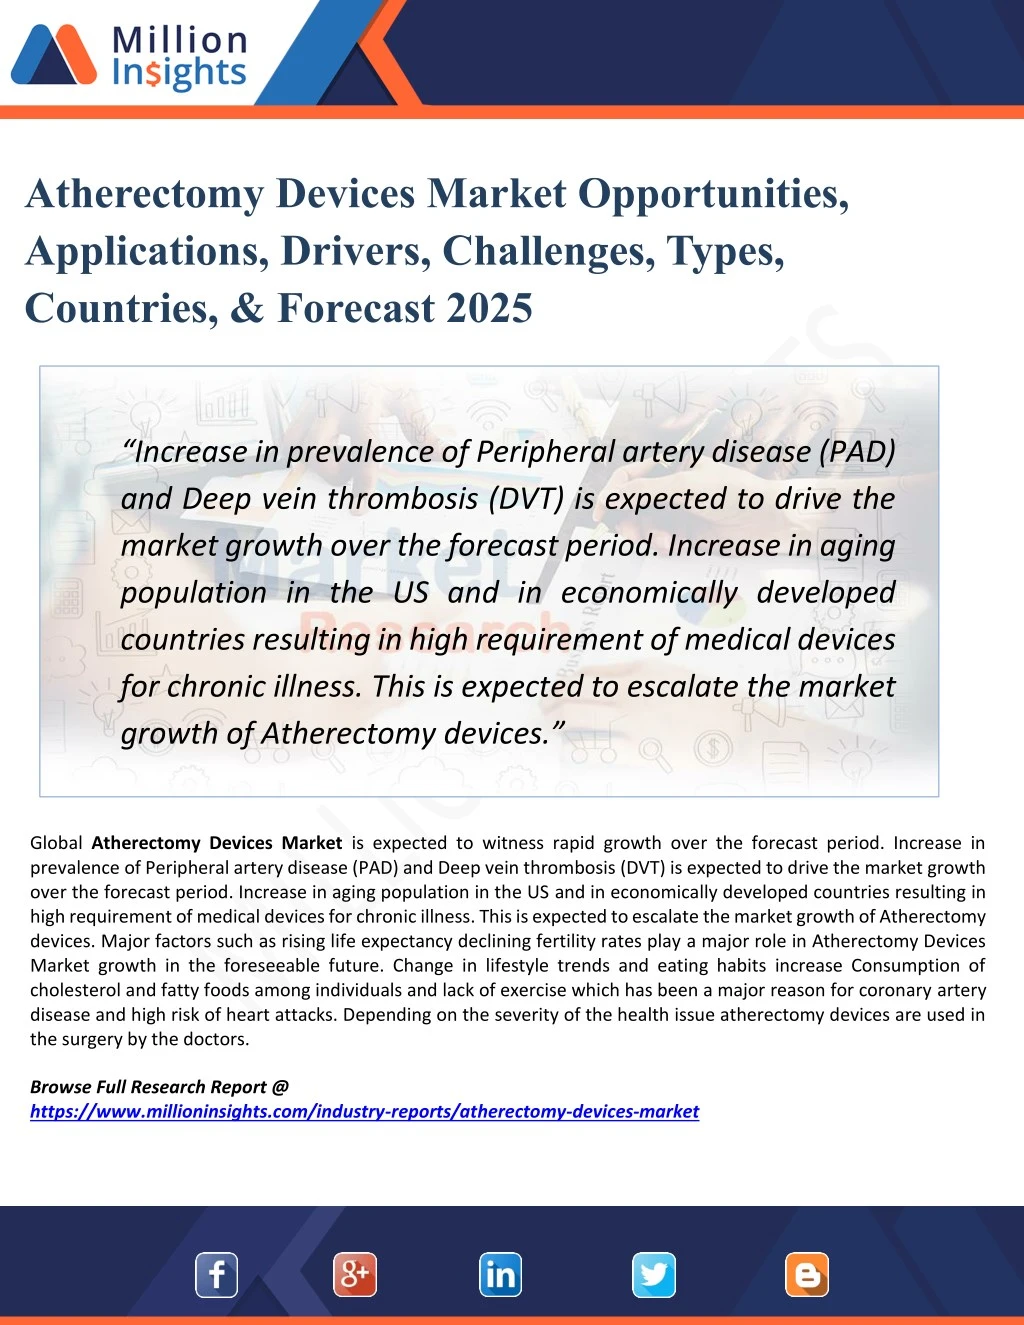 atherectomy devices market opportunities